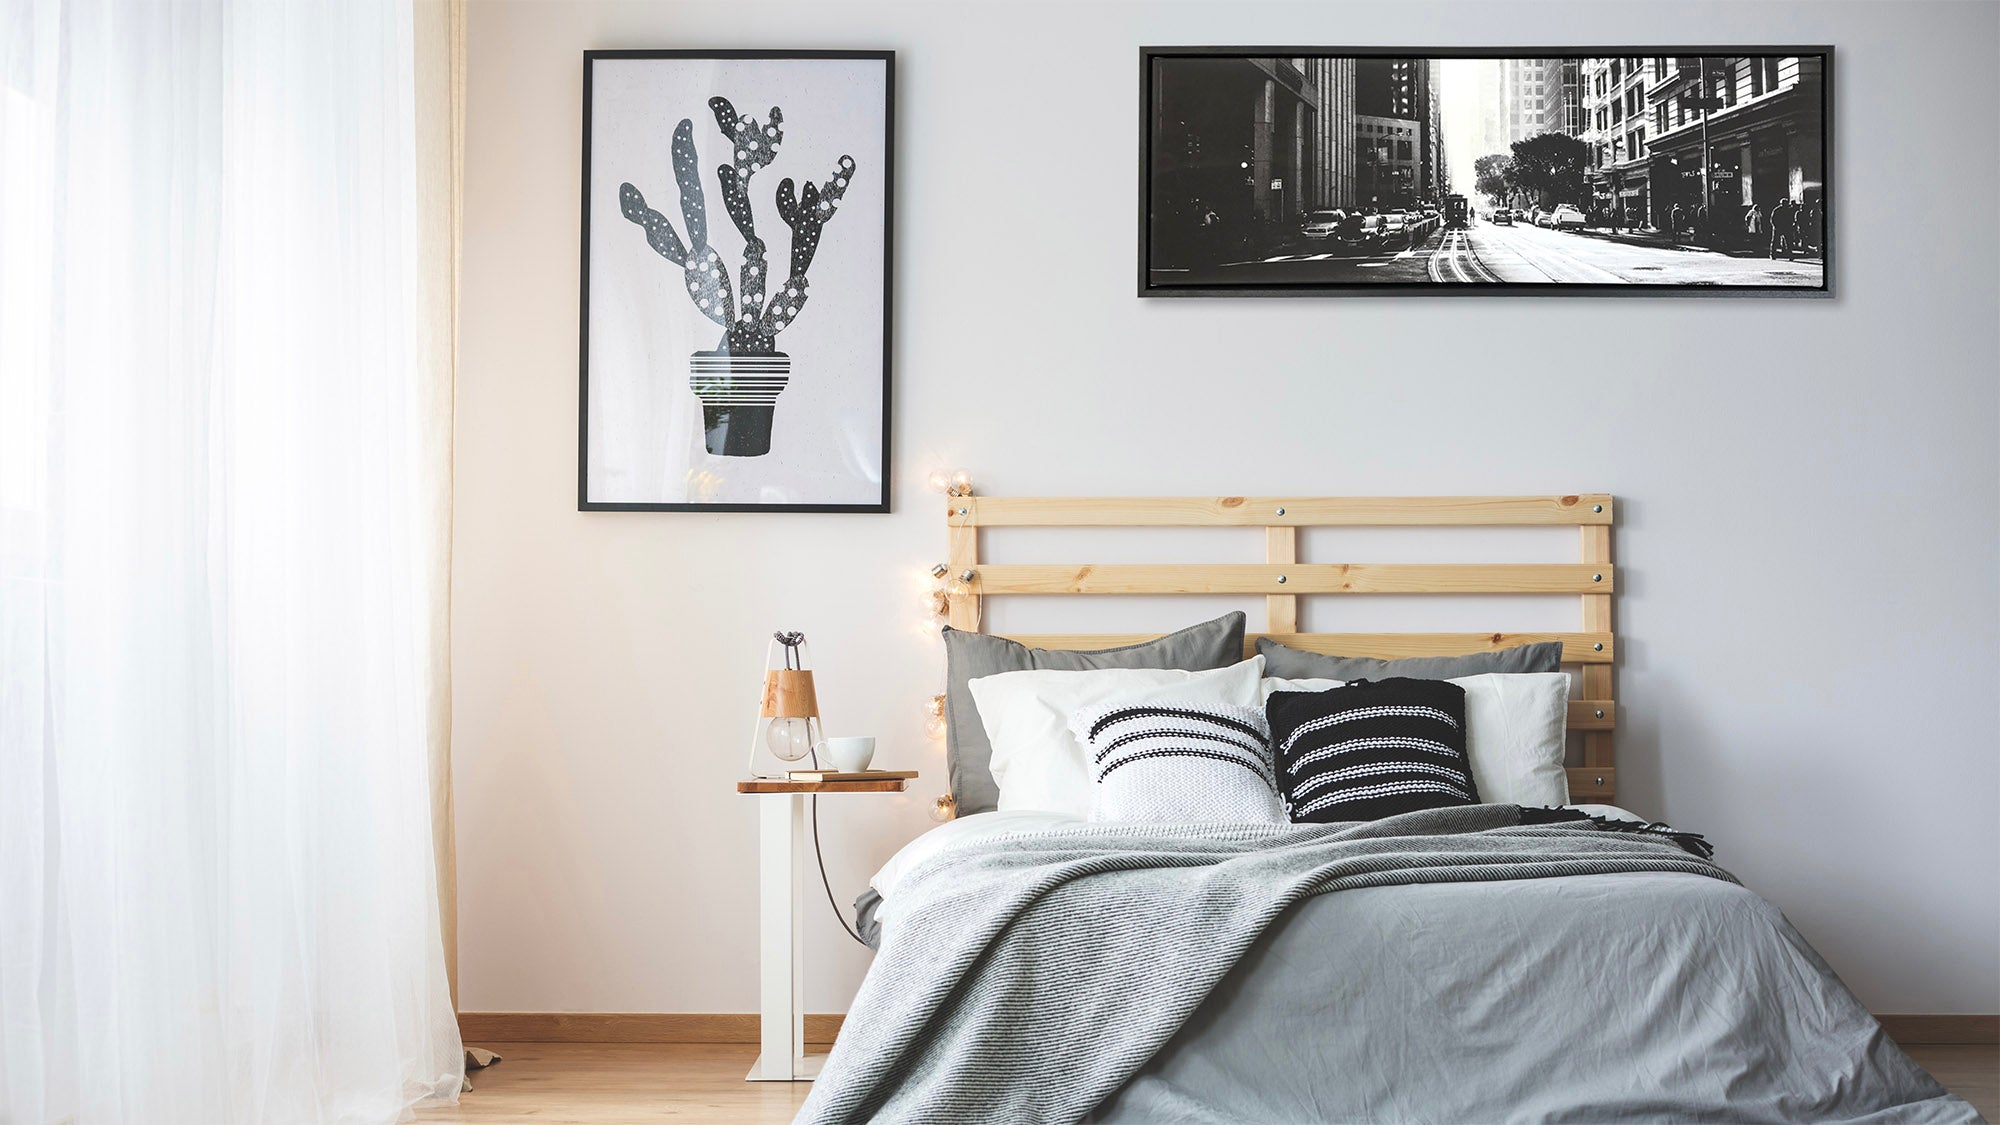 Standard Or Panoramic Image? Considerations For Your Canvas Picture Prints